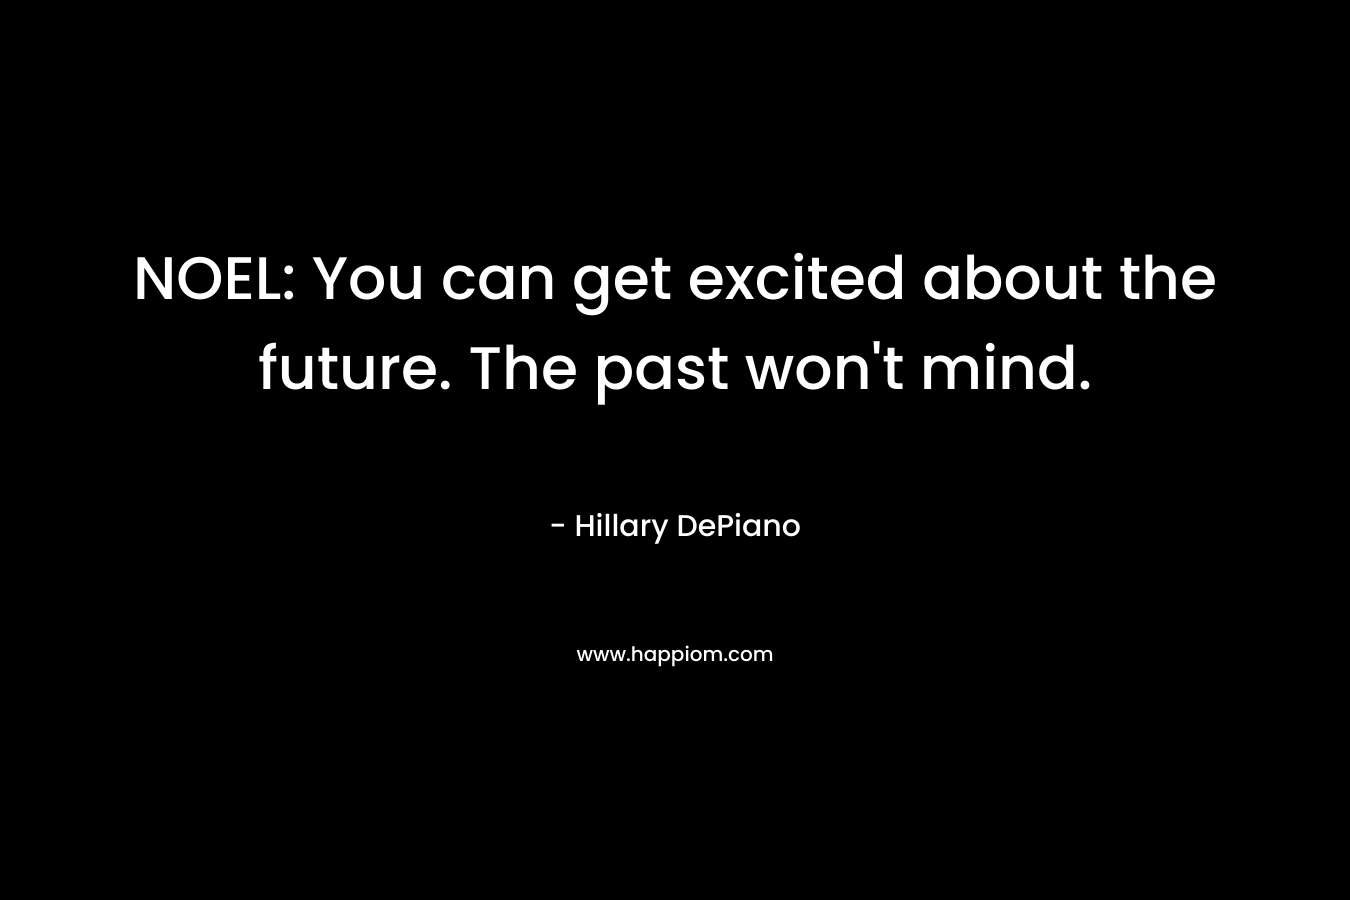 NOEL: You can get excited about the future. The past won’t mind. – Hillary DePiano